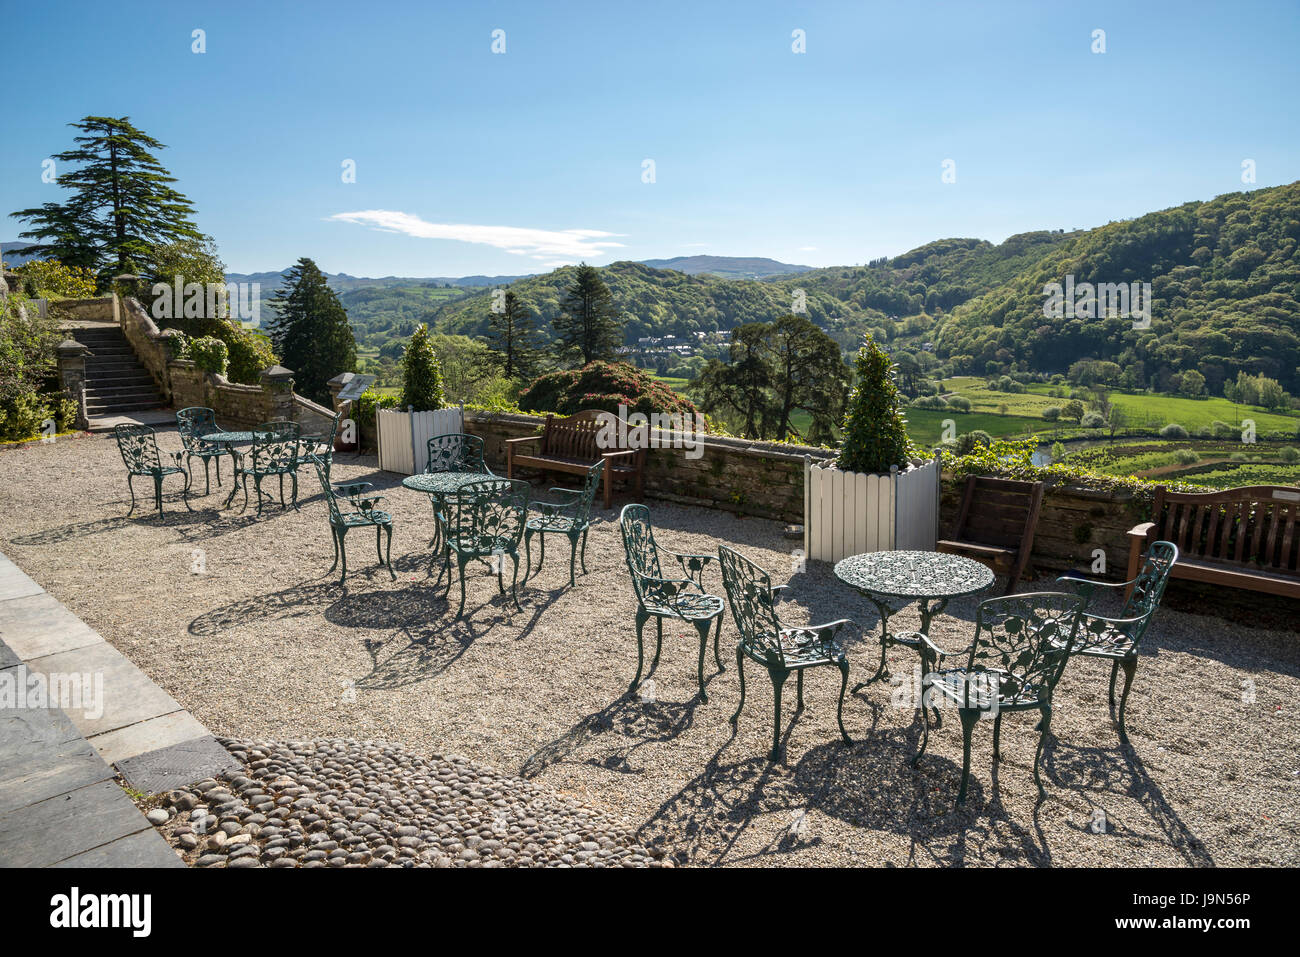 Chairs and tables on the terrace at Plas Tan y Bwlch gardens near Maentwrog in Snowdonia, North Wales, UK. Stock Photo